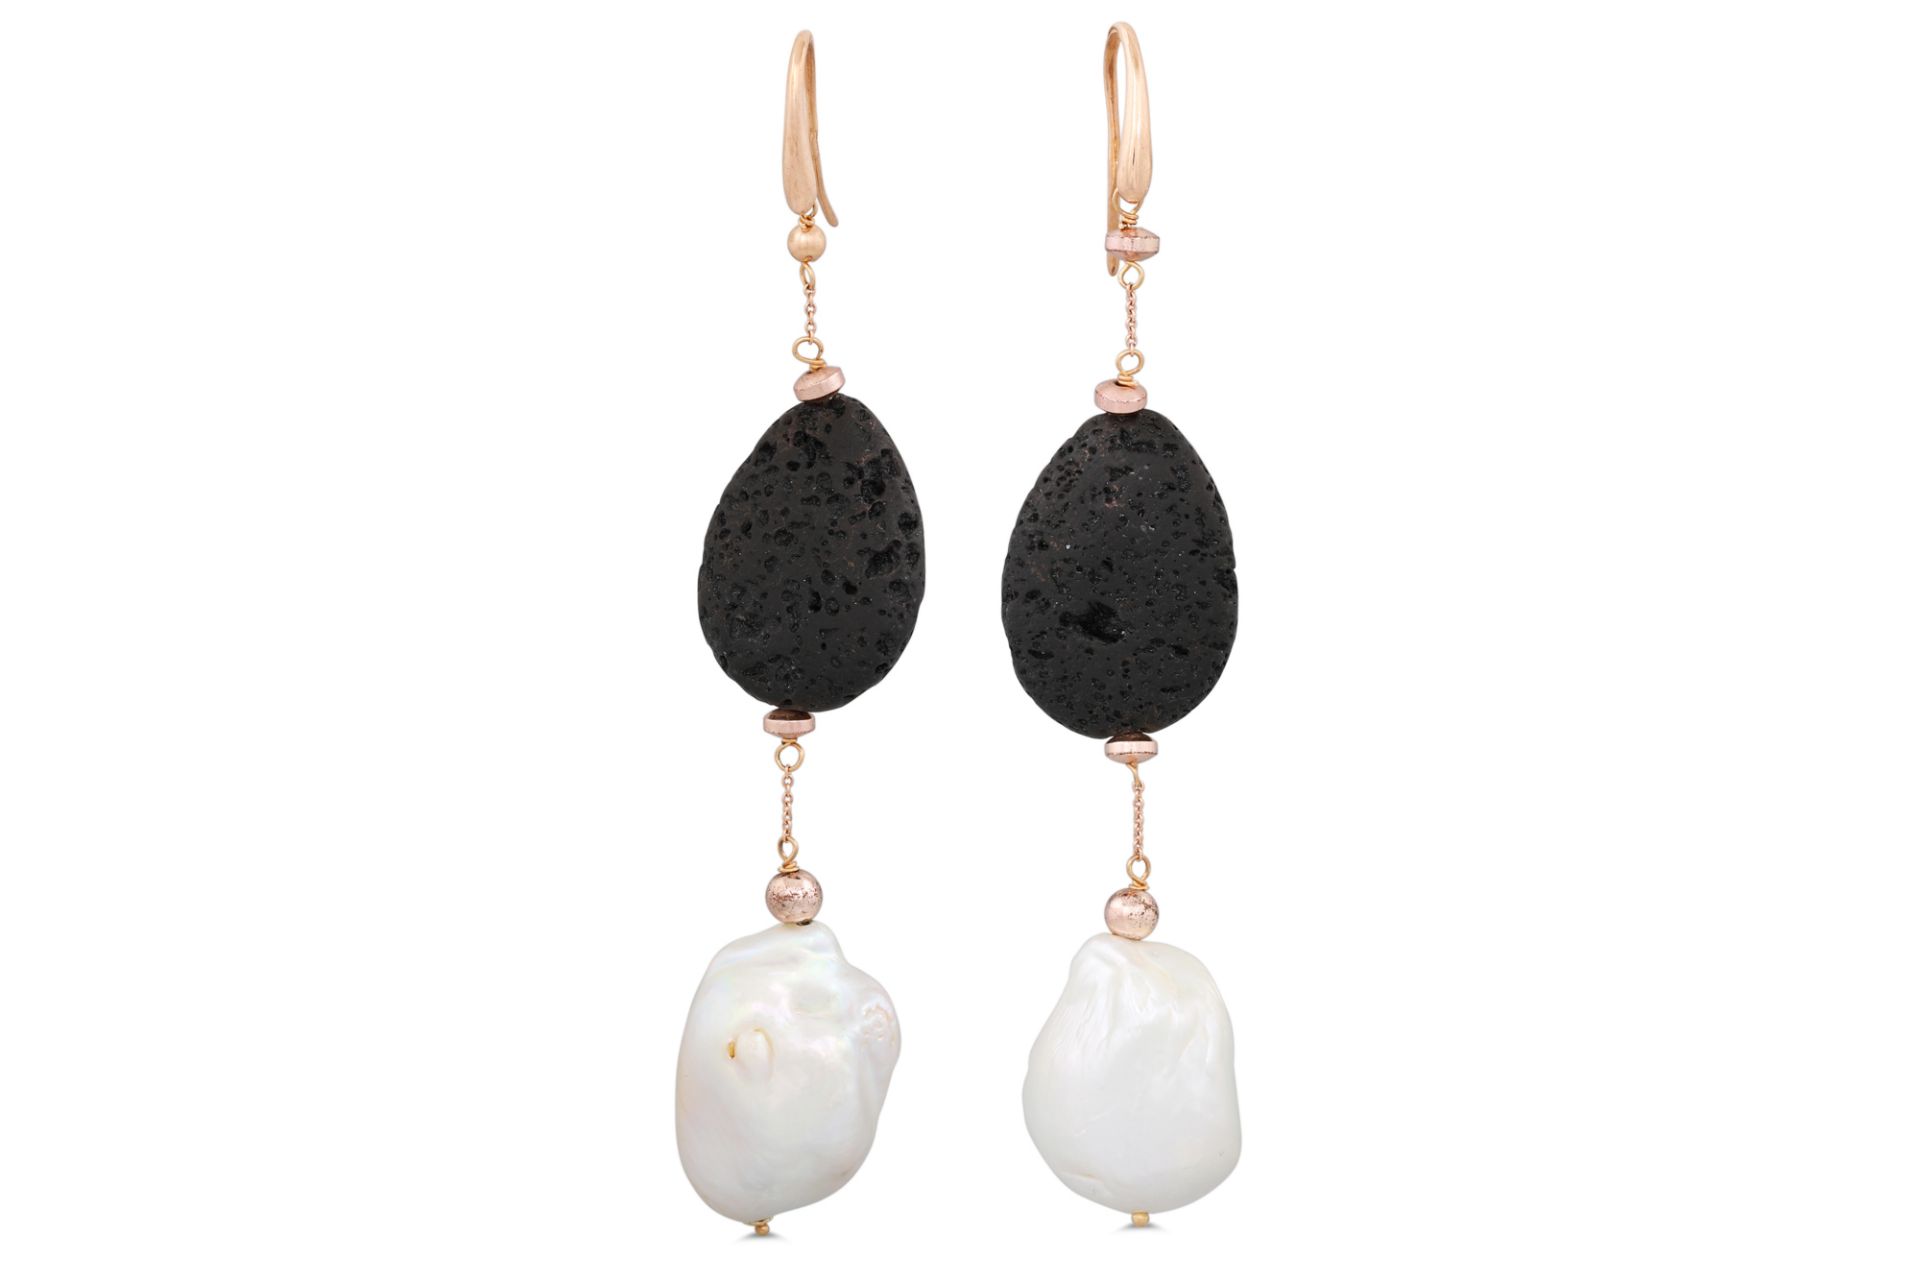 A PAIR OF BAROQUE PEARL AND LAVA DROP EARRINGS, mounted in gold